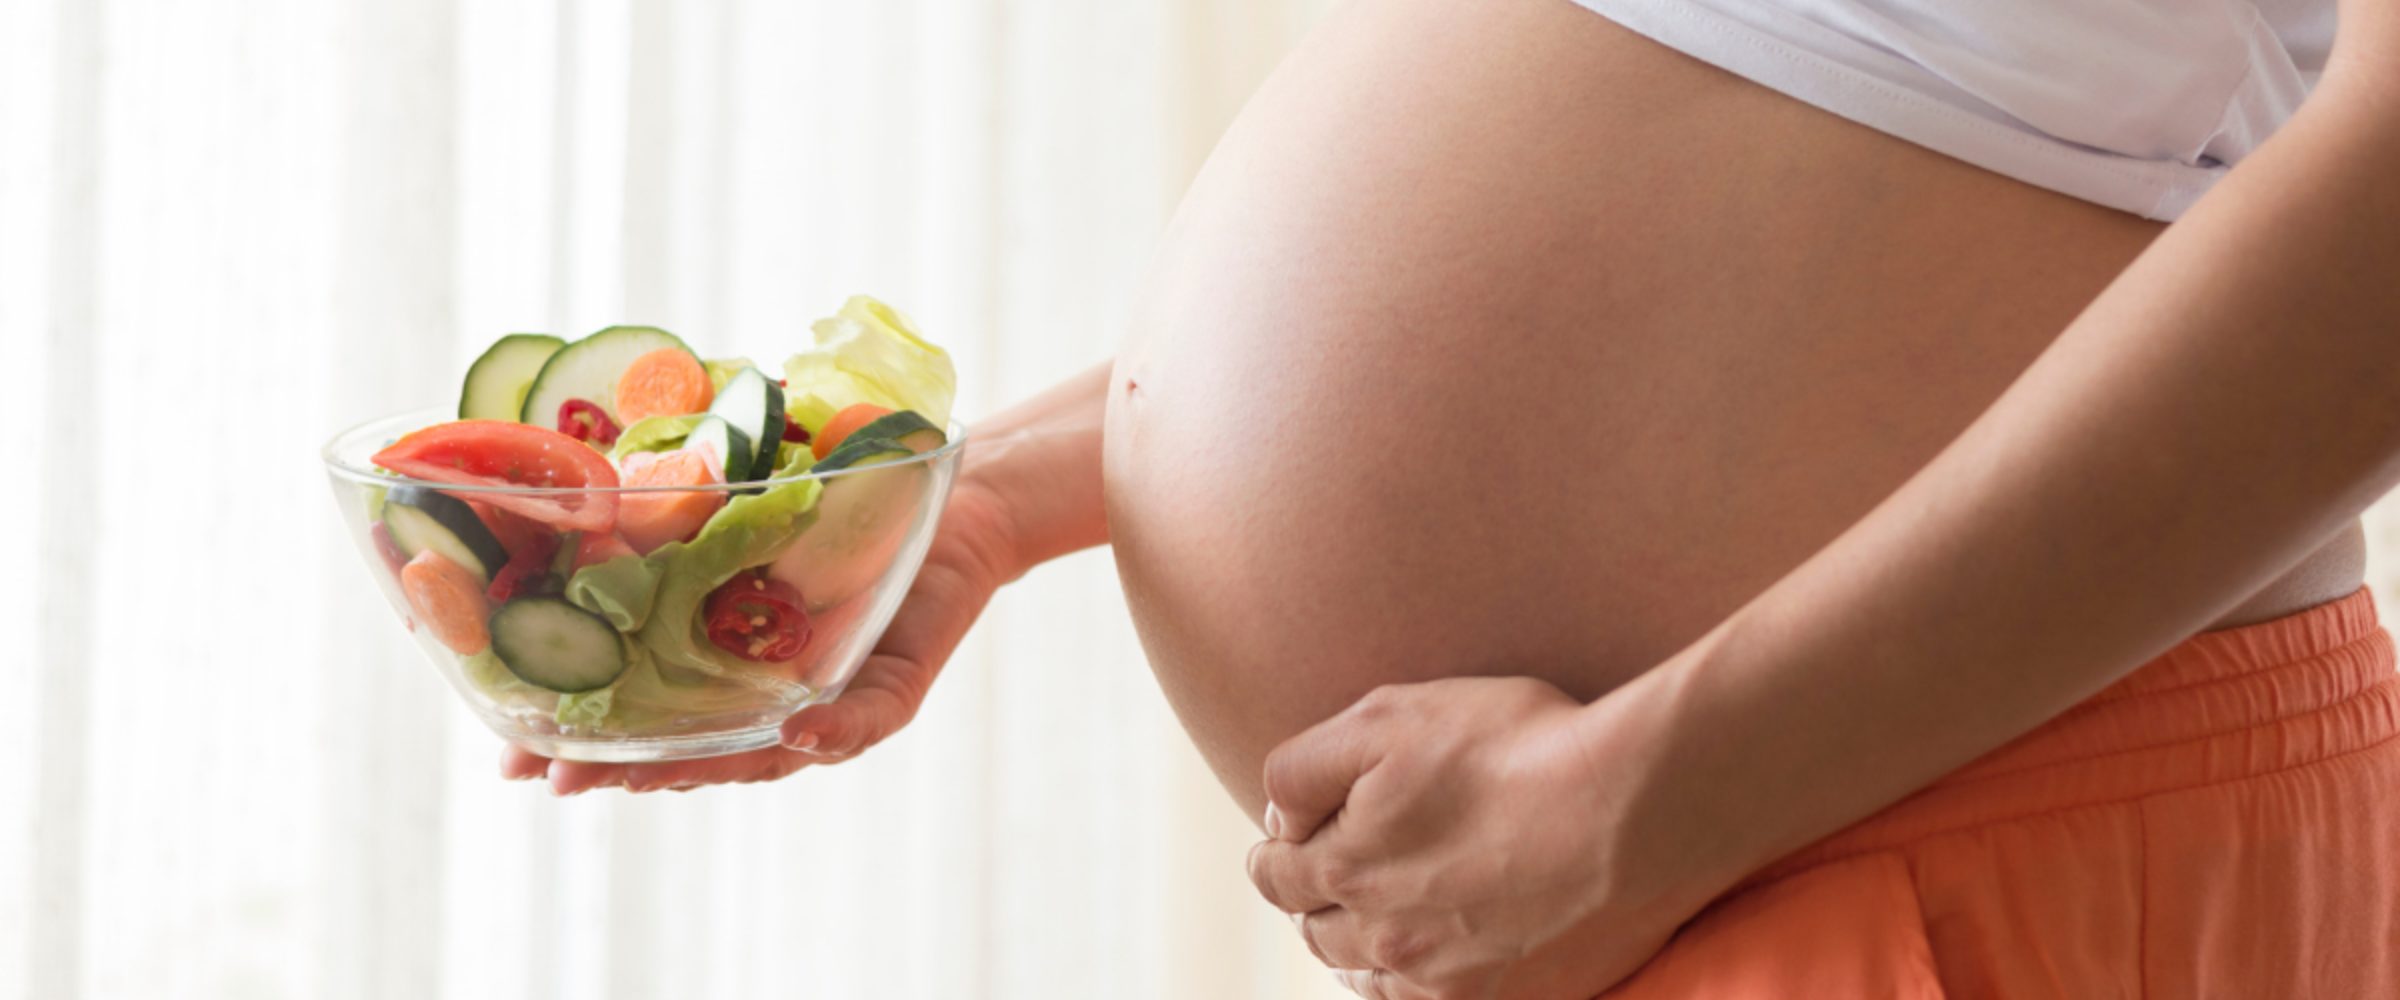 7 Foods to Avoid When Trying to Get Pregnant